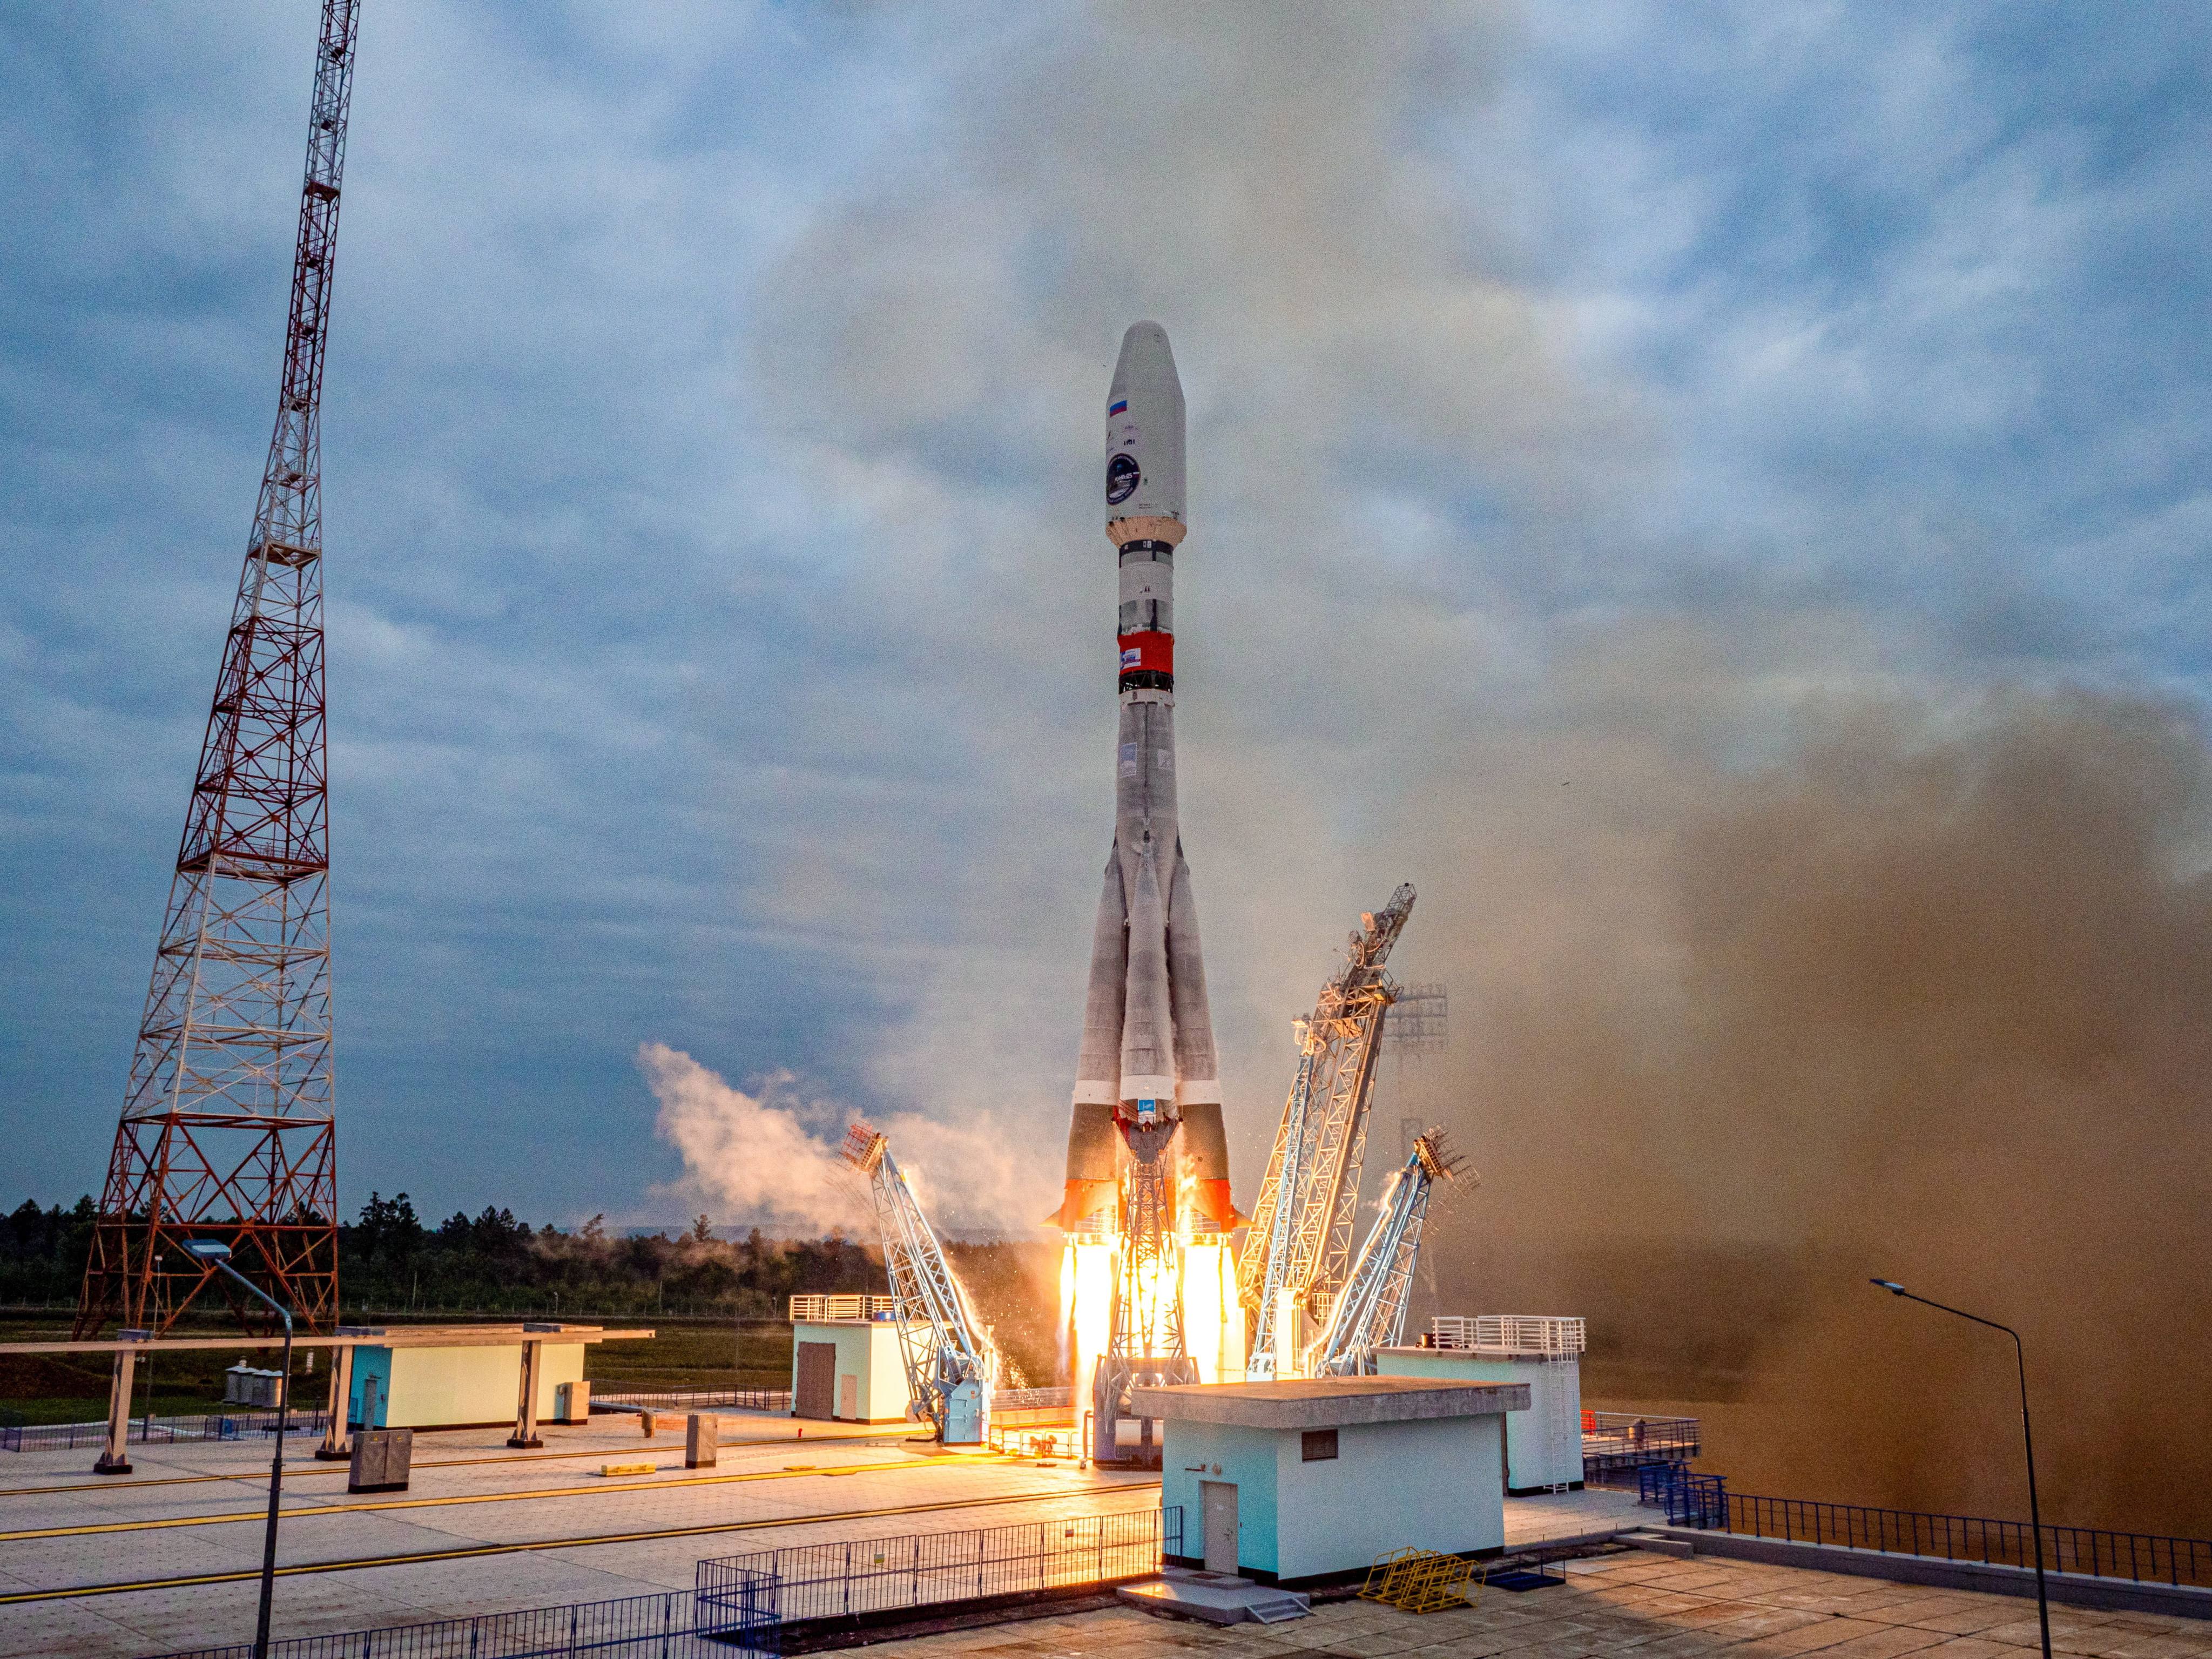 The Luna-25 takes off on its doomed mission in August, from the Vostochny Cosmodrome in Russia’s far-eastern Amur region. Photo: TNS